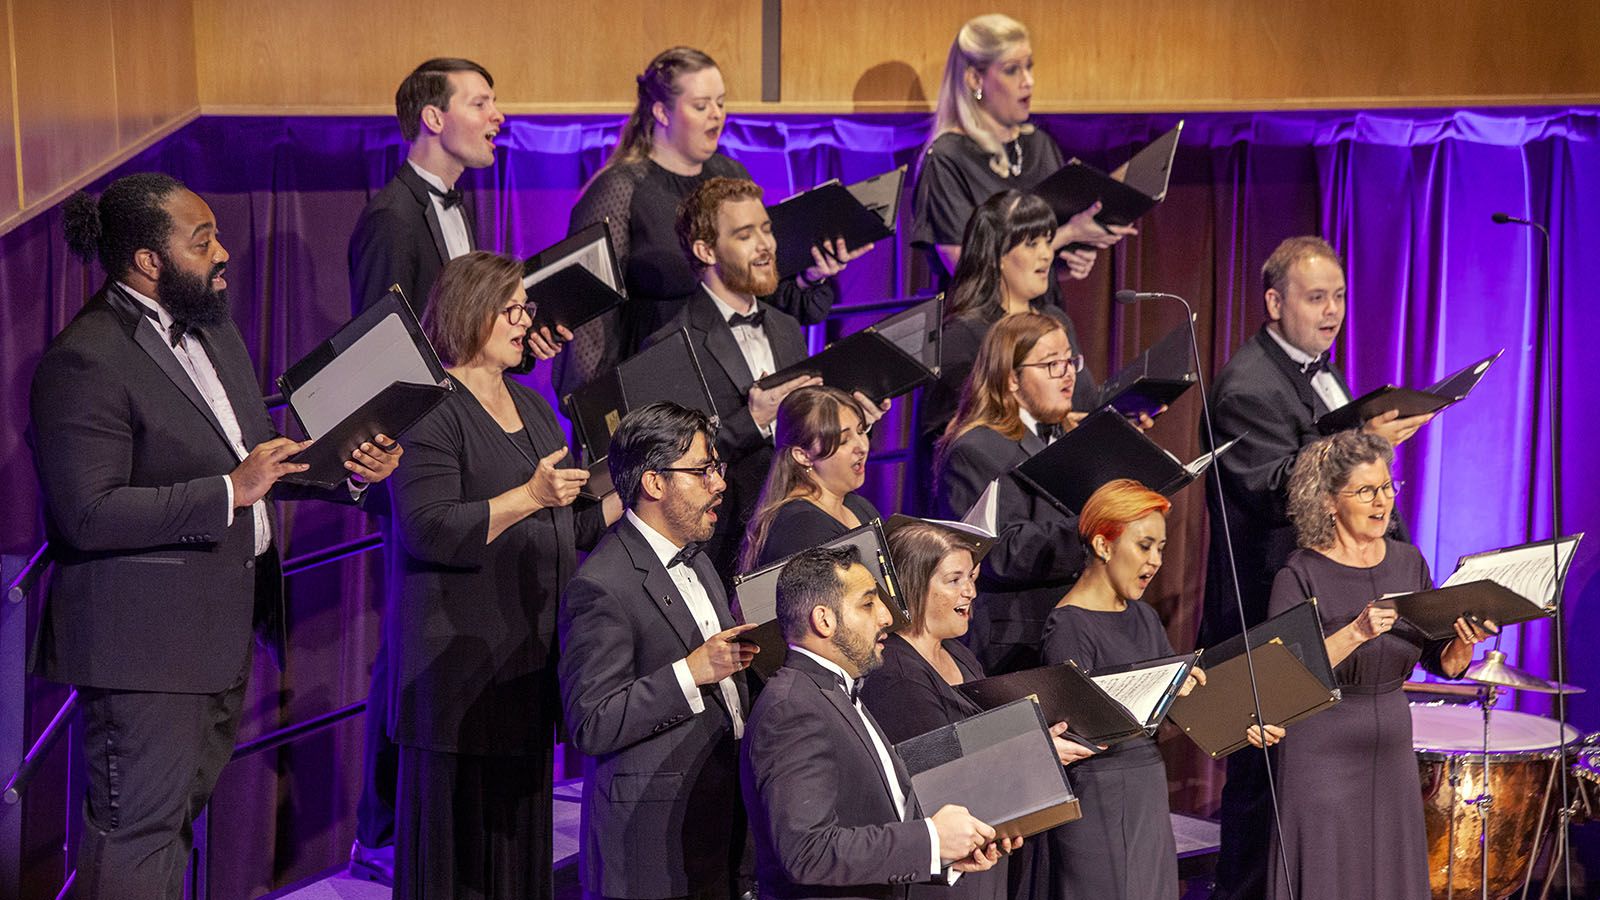 Heartland Sings will host A Night at the Opera on Wednesday, May 22, at Auer Performance Hall on the campus of Purdue University Fort Wayne.